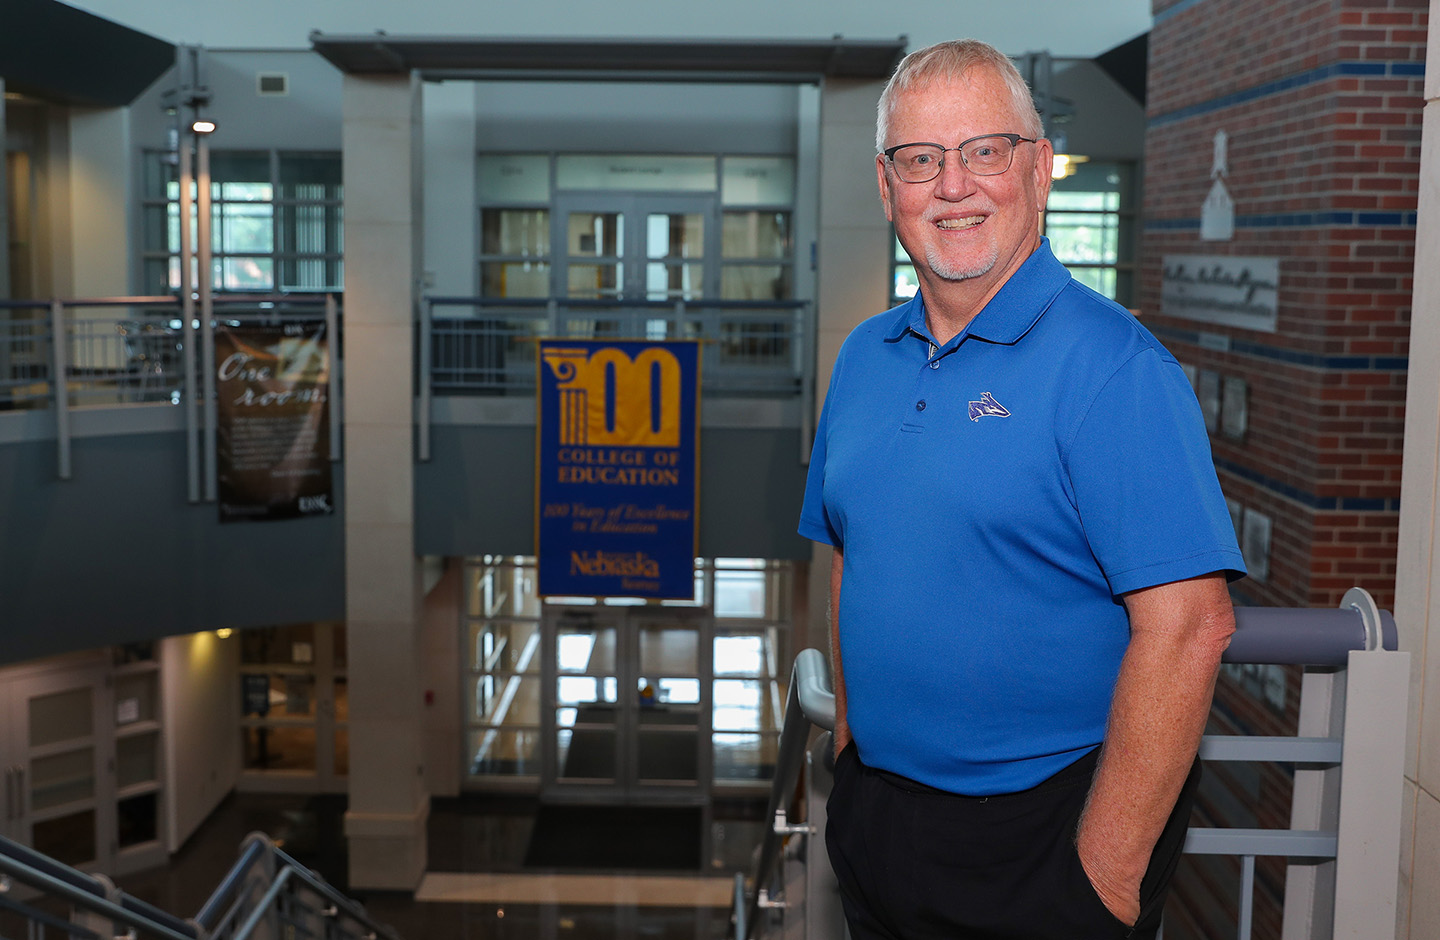 A former school administrator in Amherst, Dunning and Gothenburg, Mike Teahon leads the educational administration program at UNK. (Photo by Erika Pritchard, UNK Communications)